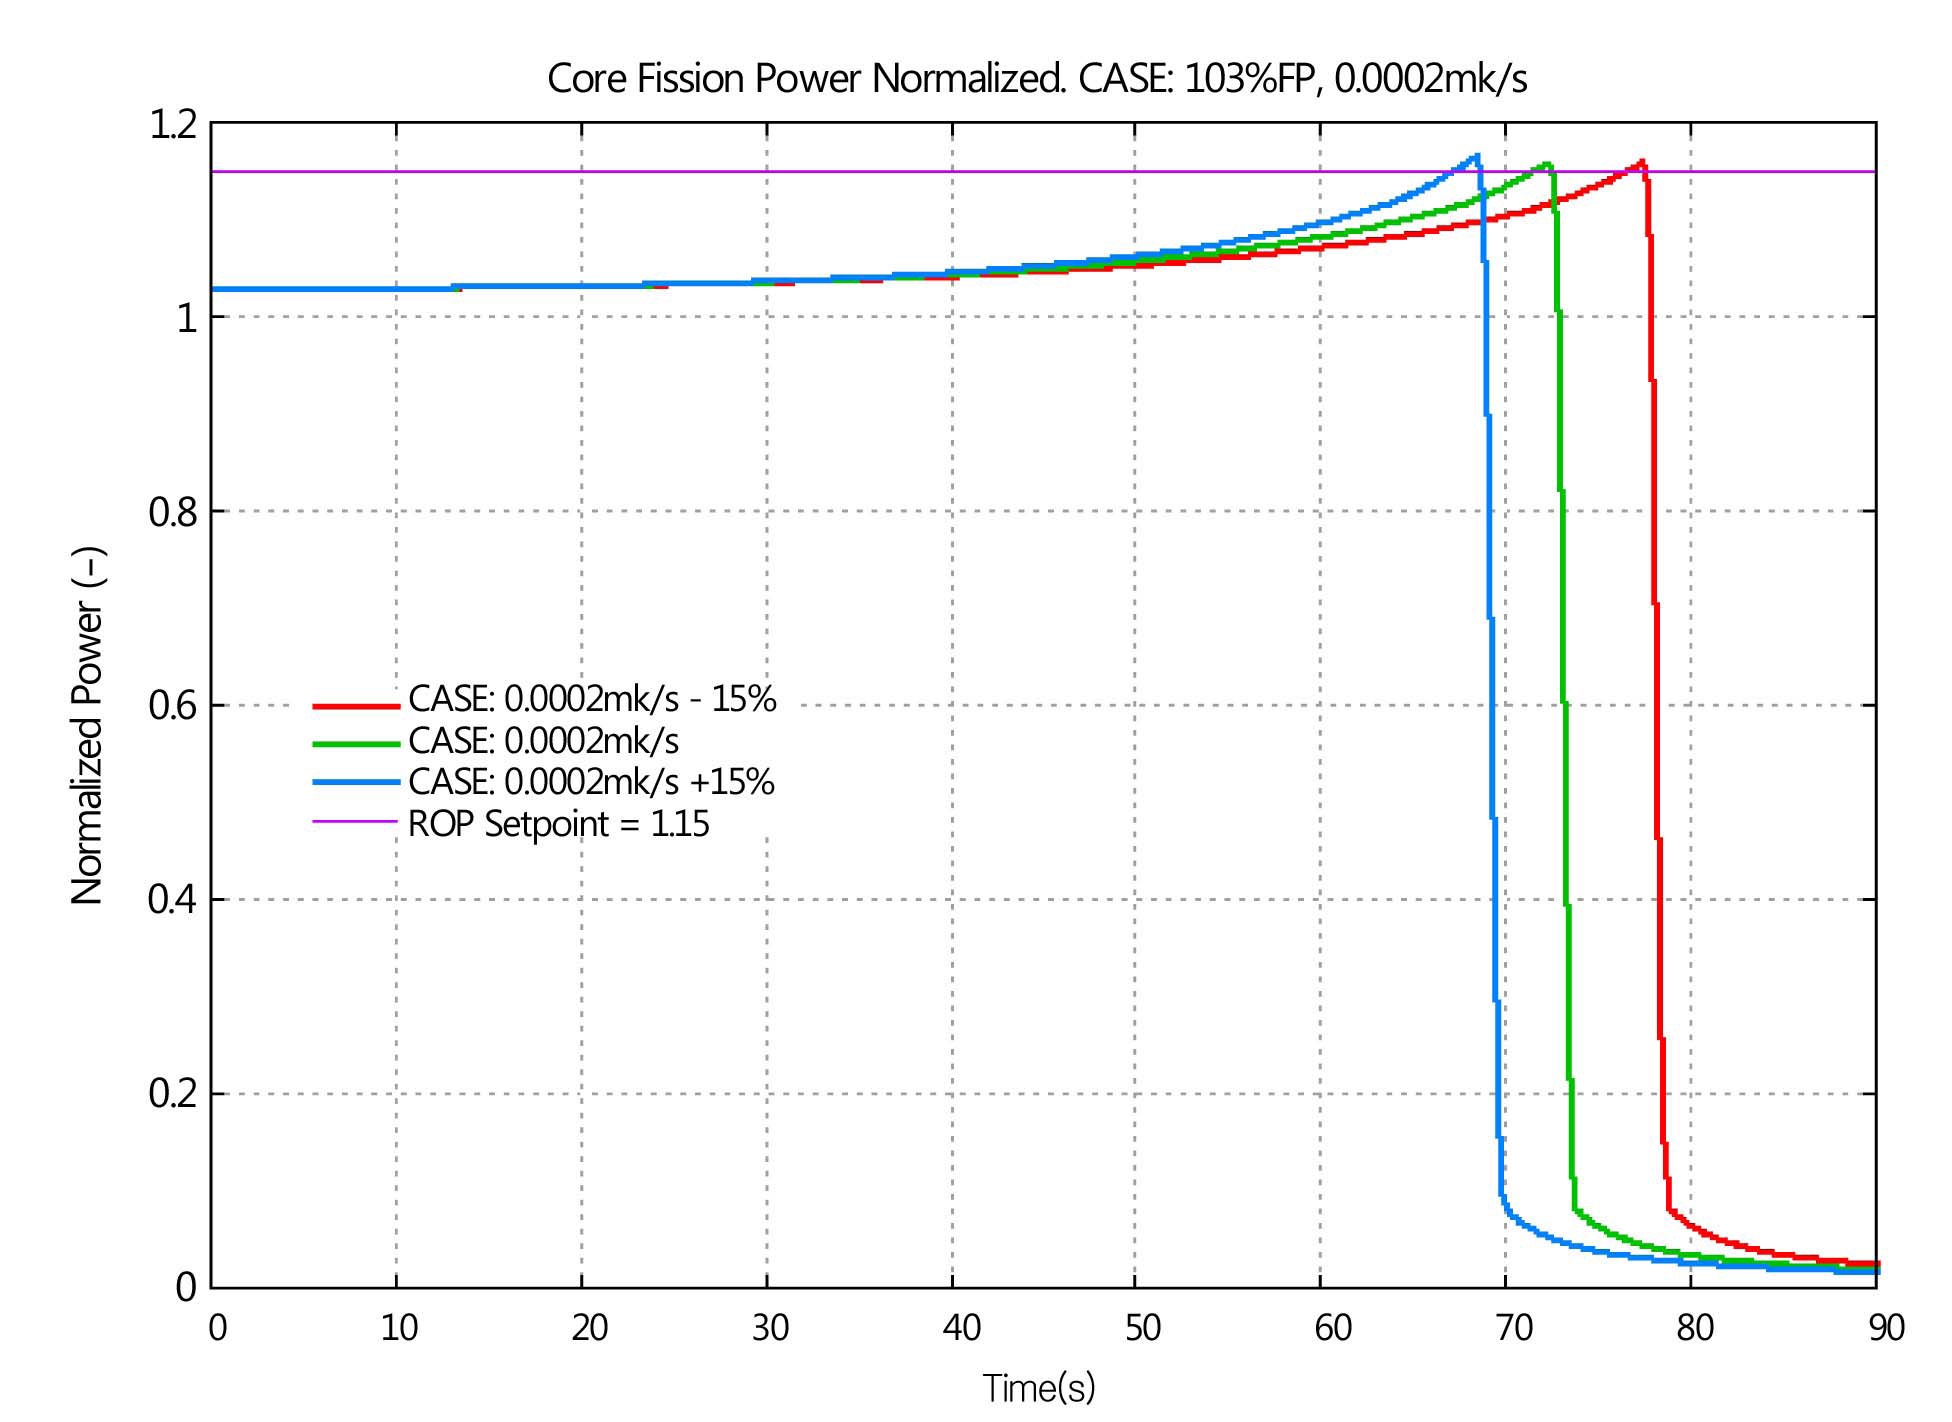 Normalized Core Fission Power (Initial Power 103%FP with an Insertion Rate of 0.0002mk/s)